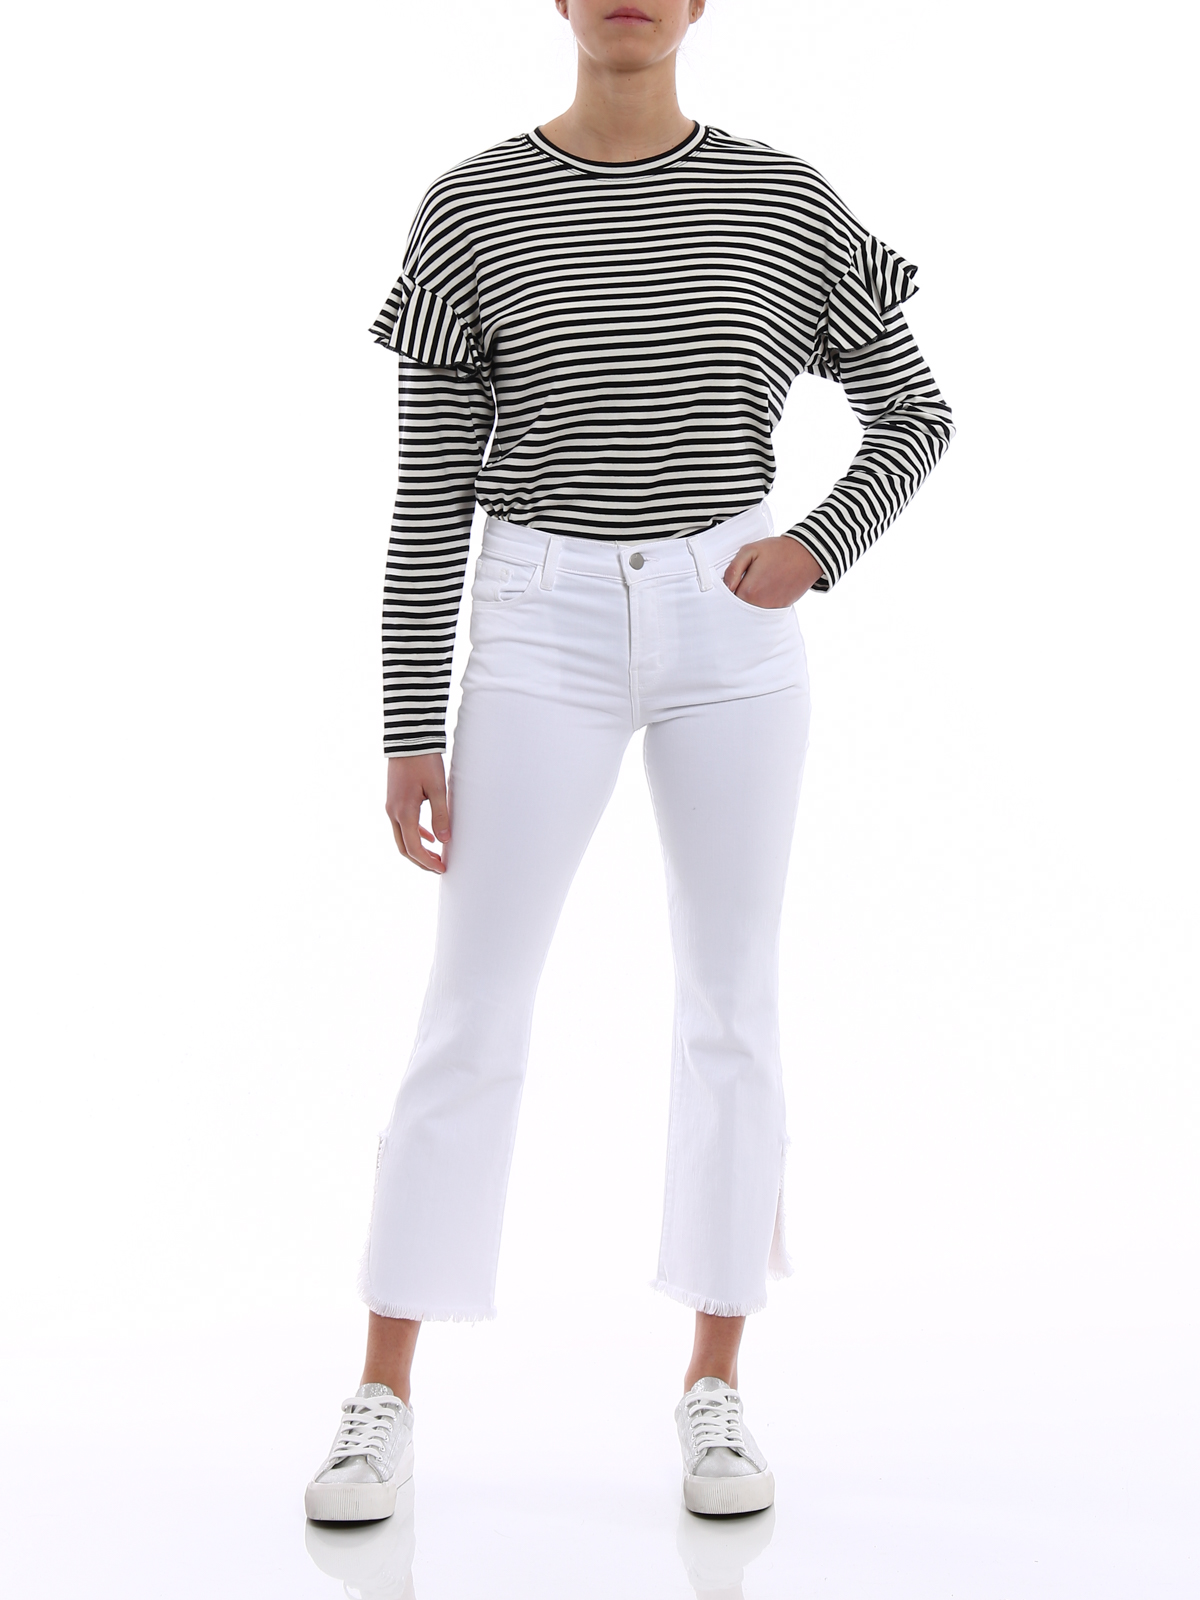 j brand white cropped jeans